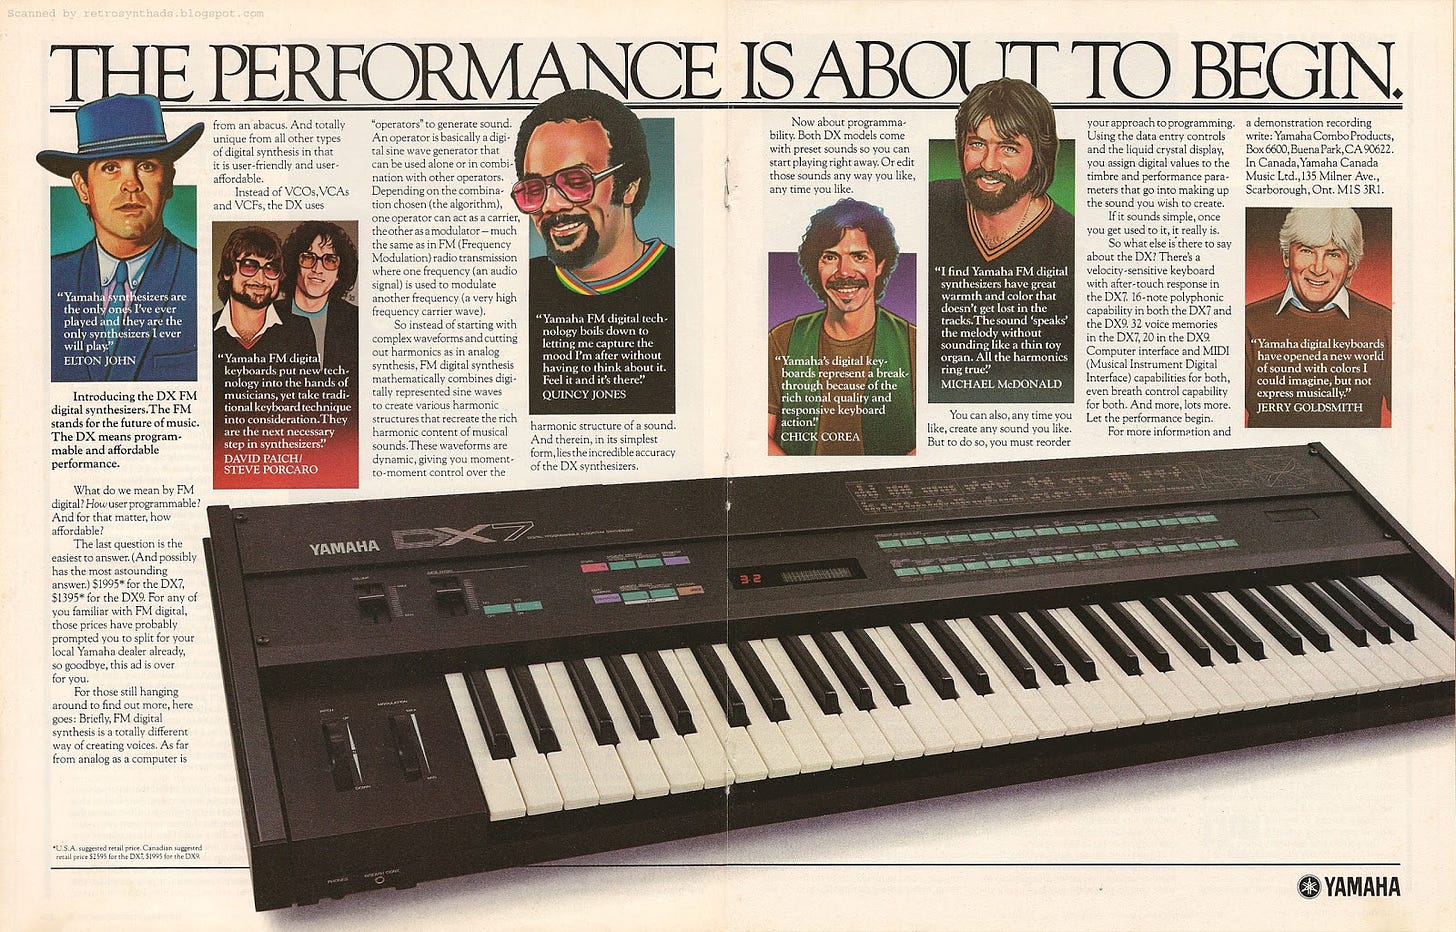 Retro Synth Ads: Yamaha DX7 "The Performance is about to begin" 2-page ad -  Part 1, Keyboard 1983